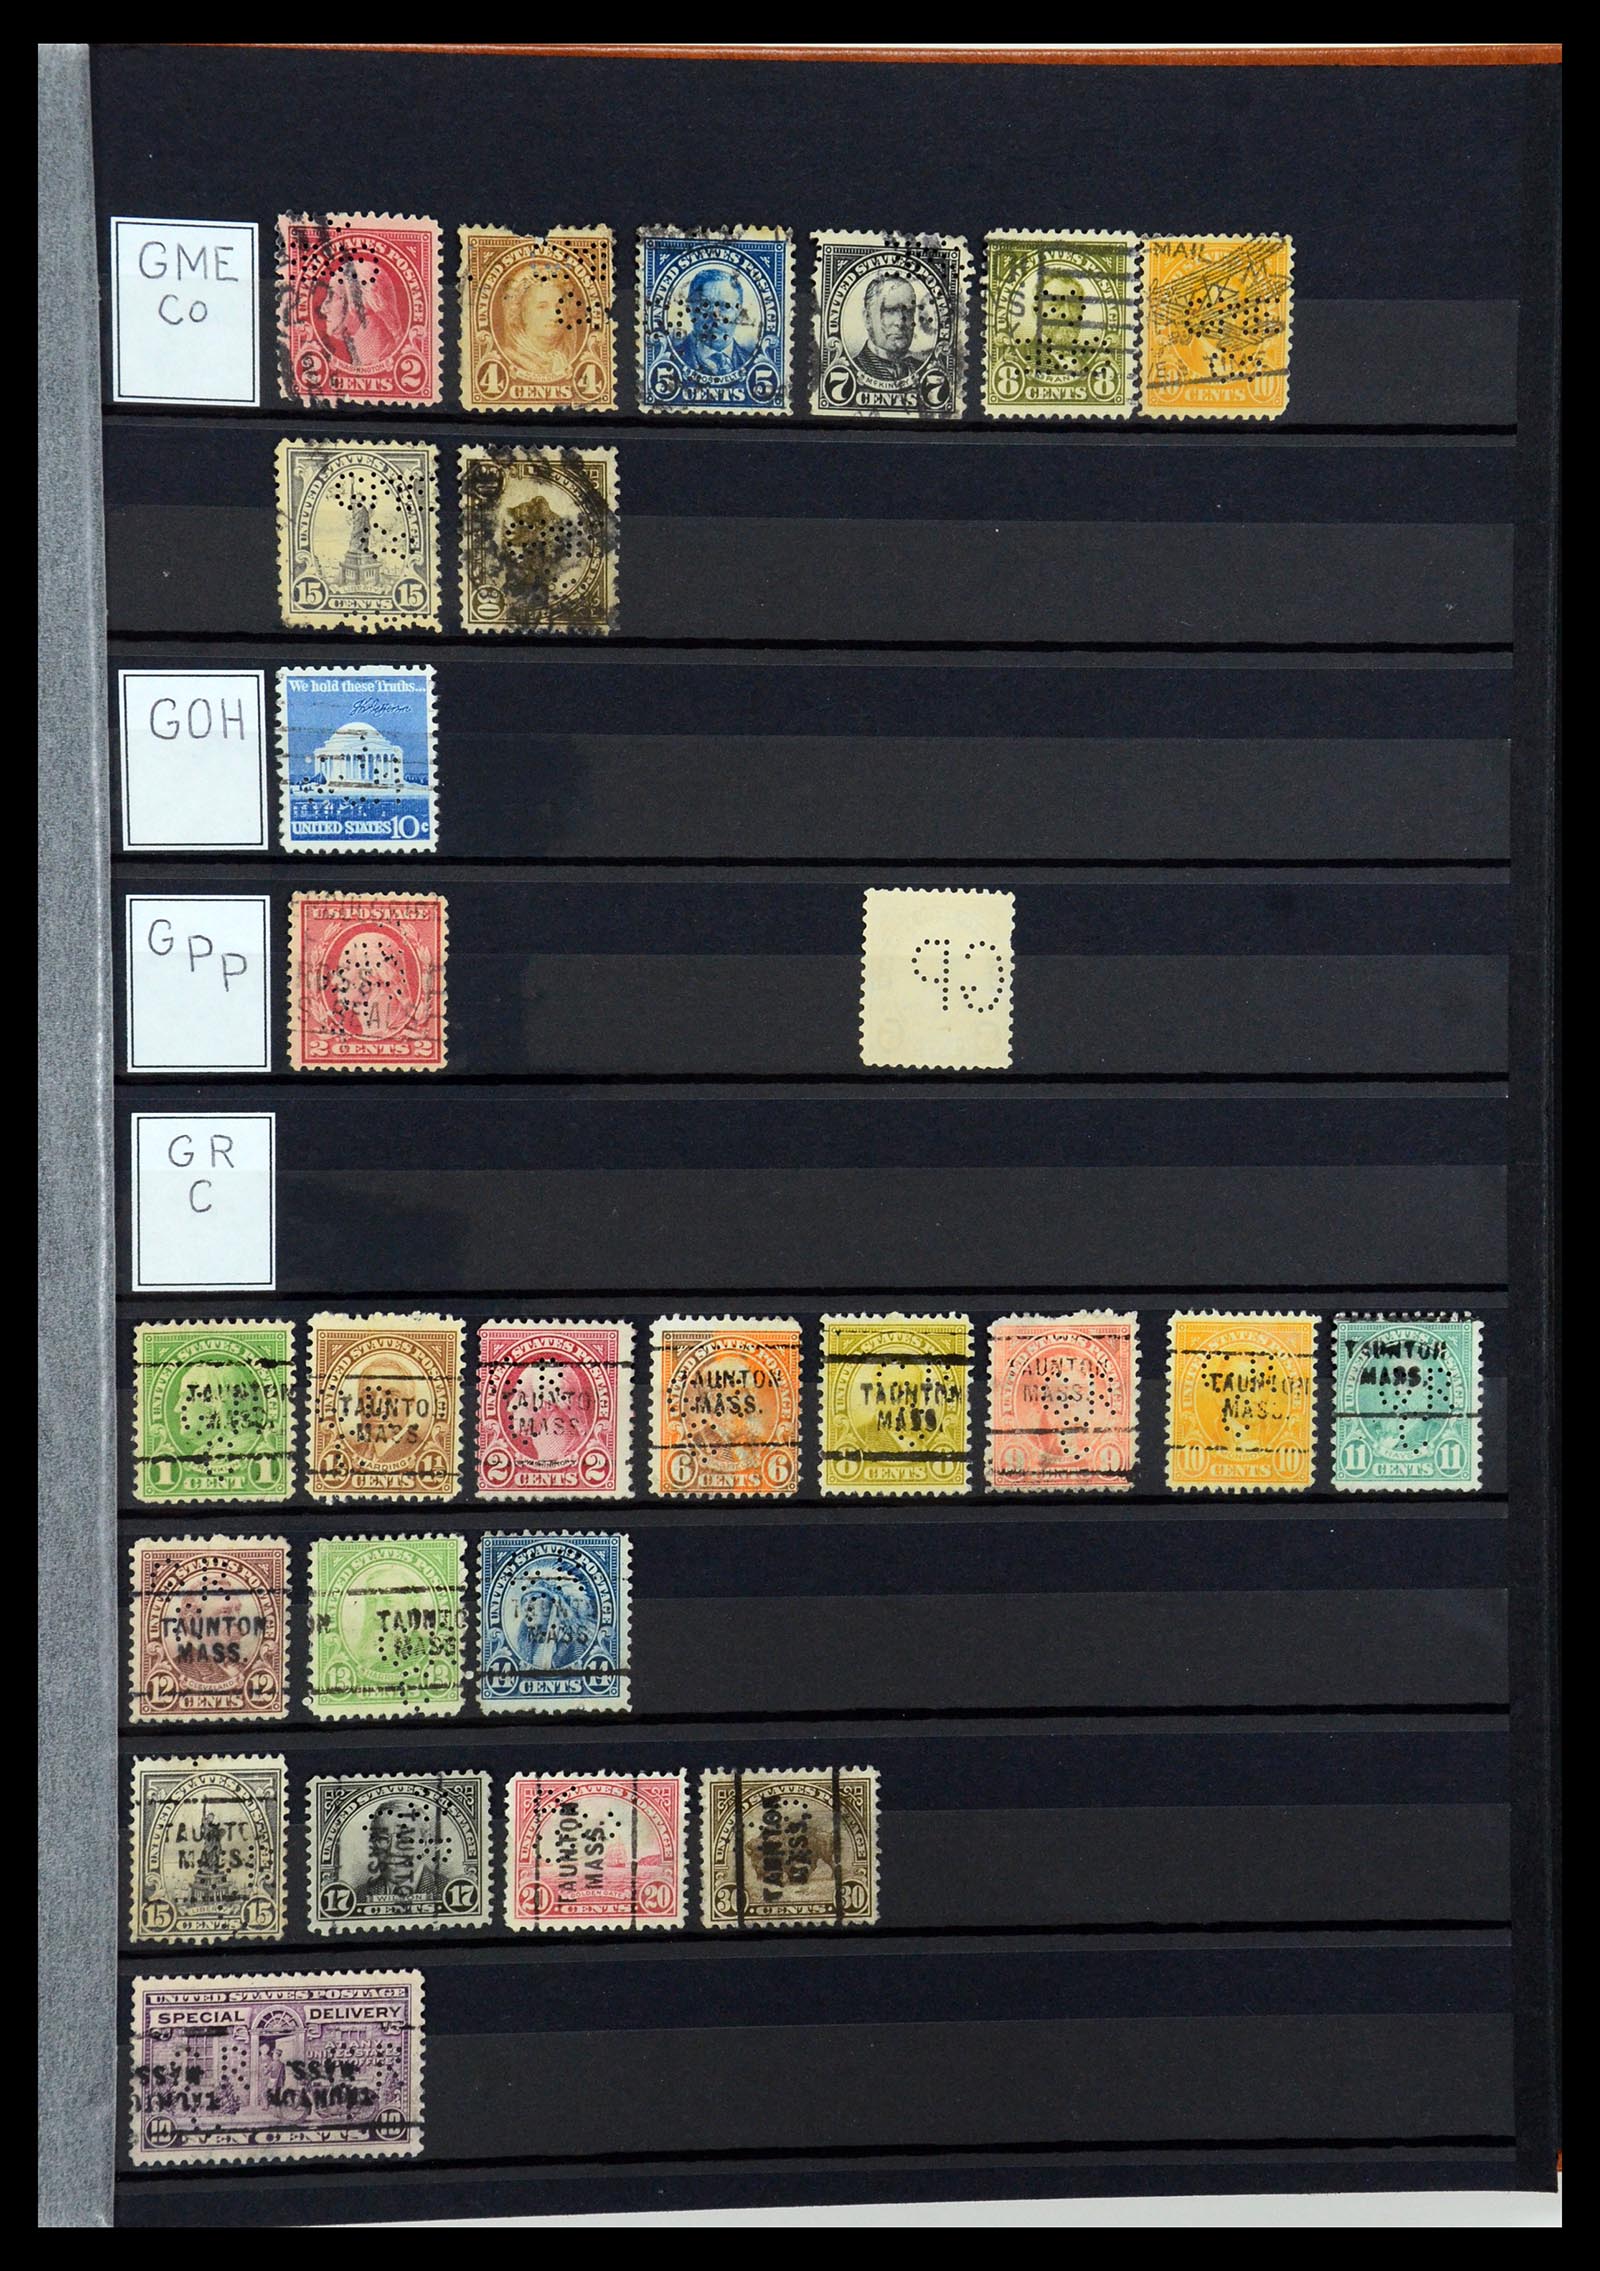 36388 057 - Stamp collection 36388 USA perfins.